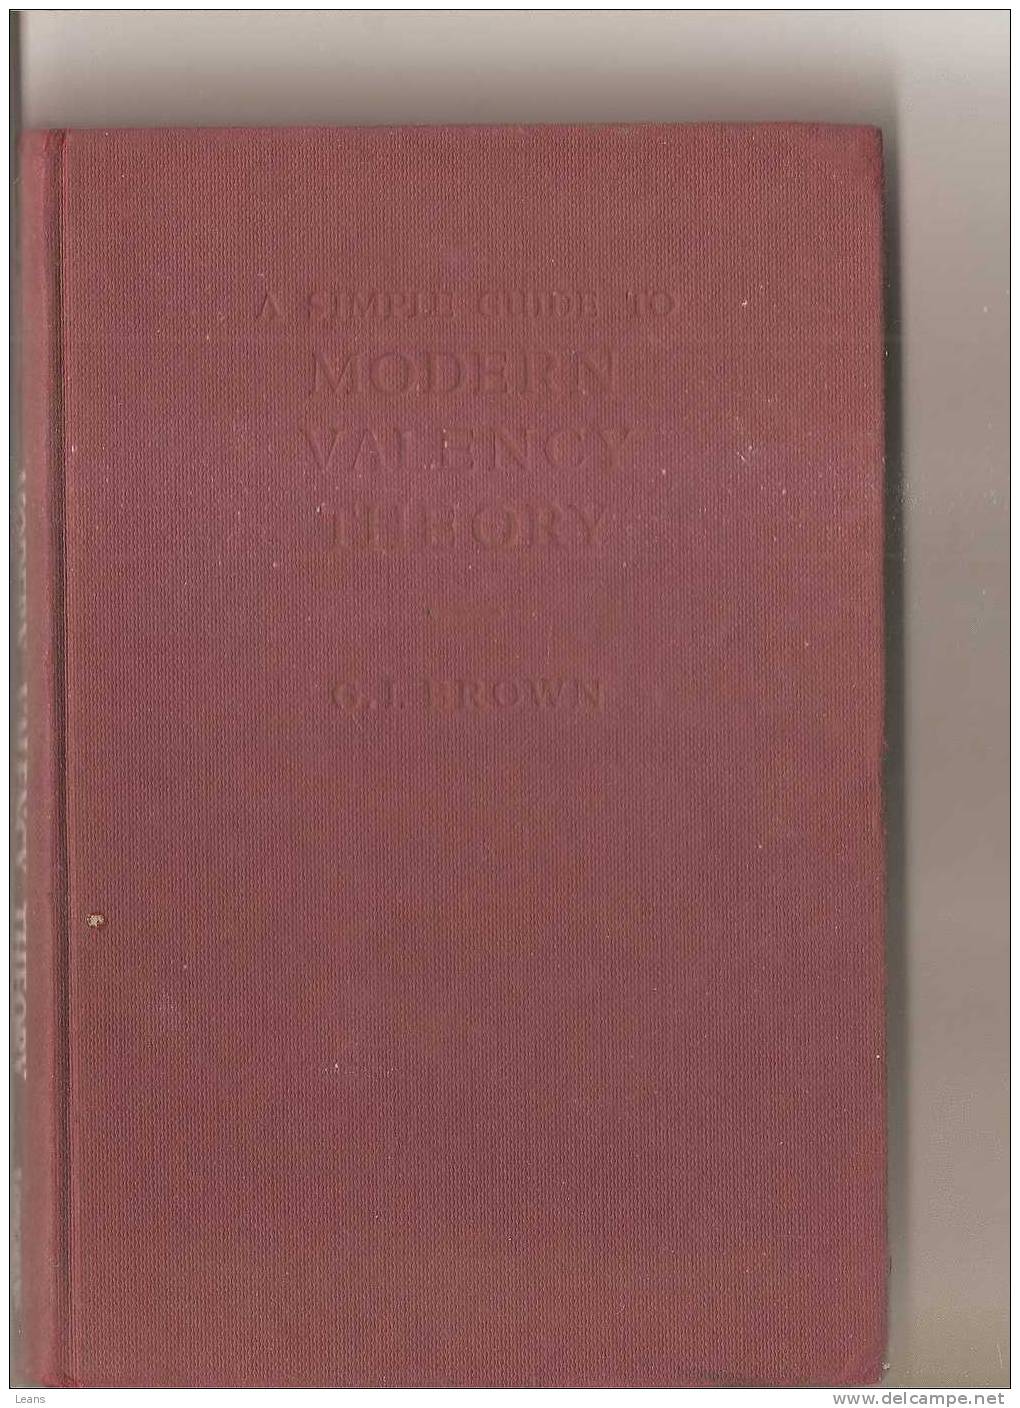 A SIMPLE GUIDE TO MODERN VALENCY THEORY    Ed: BROWN - Science